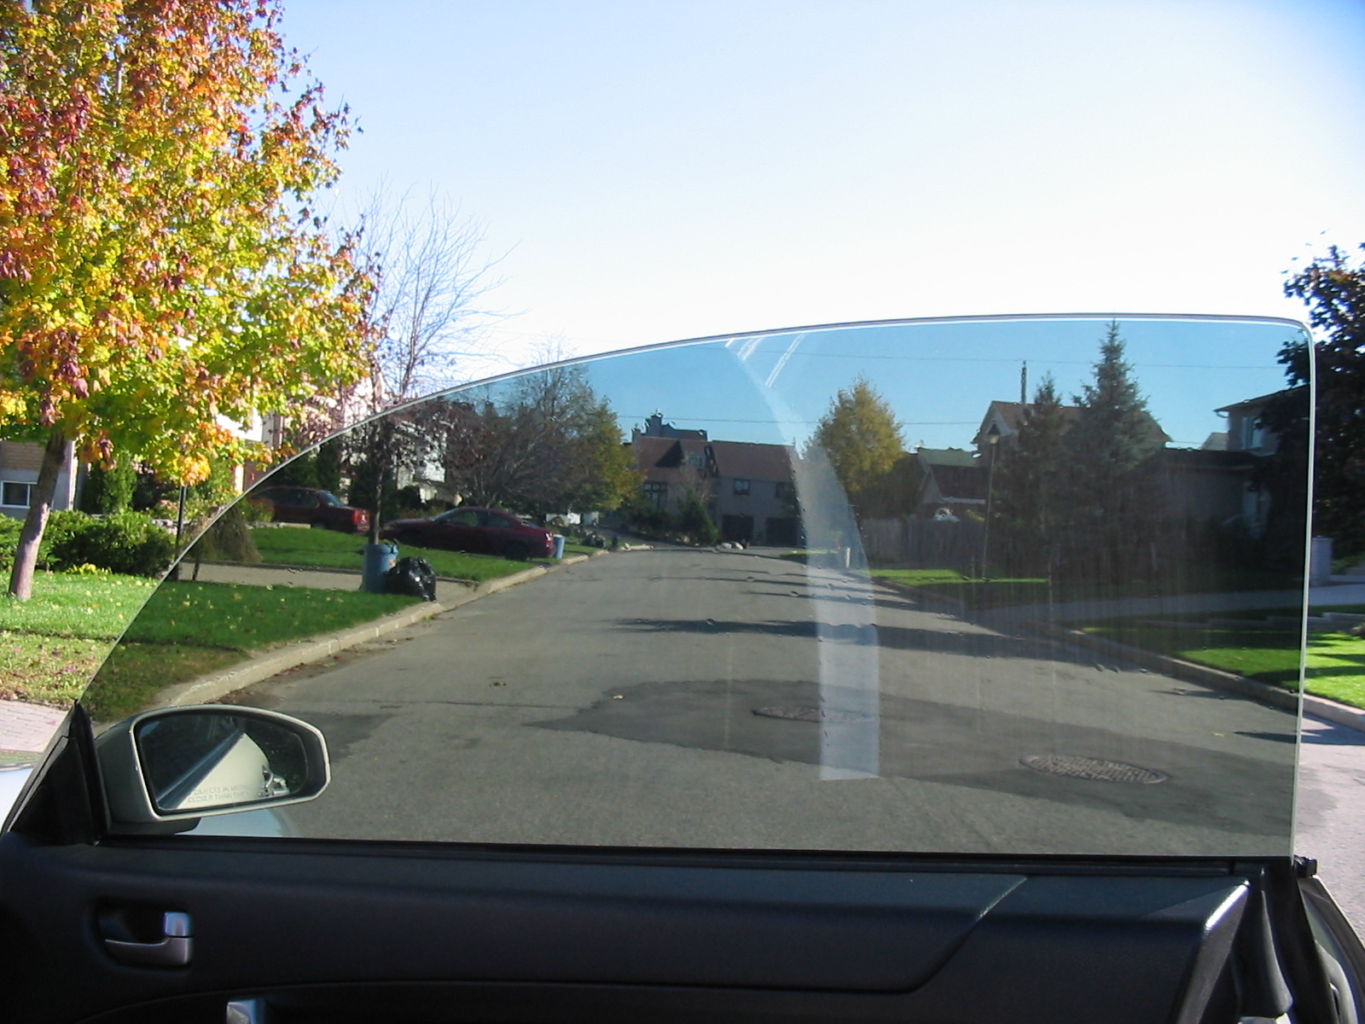 Clean Automotive Tinted Windows Properly To Avoid Damage in Springfield, Missouri